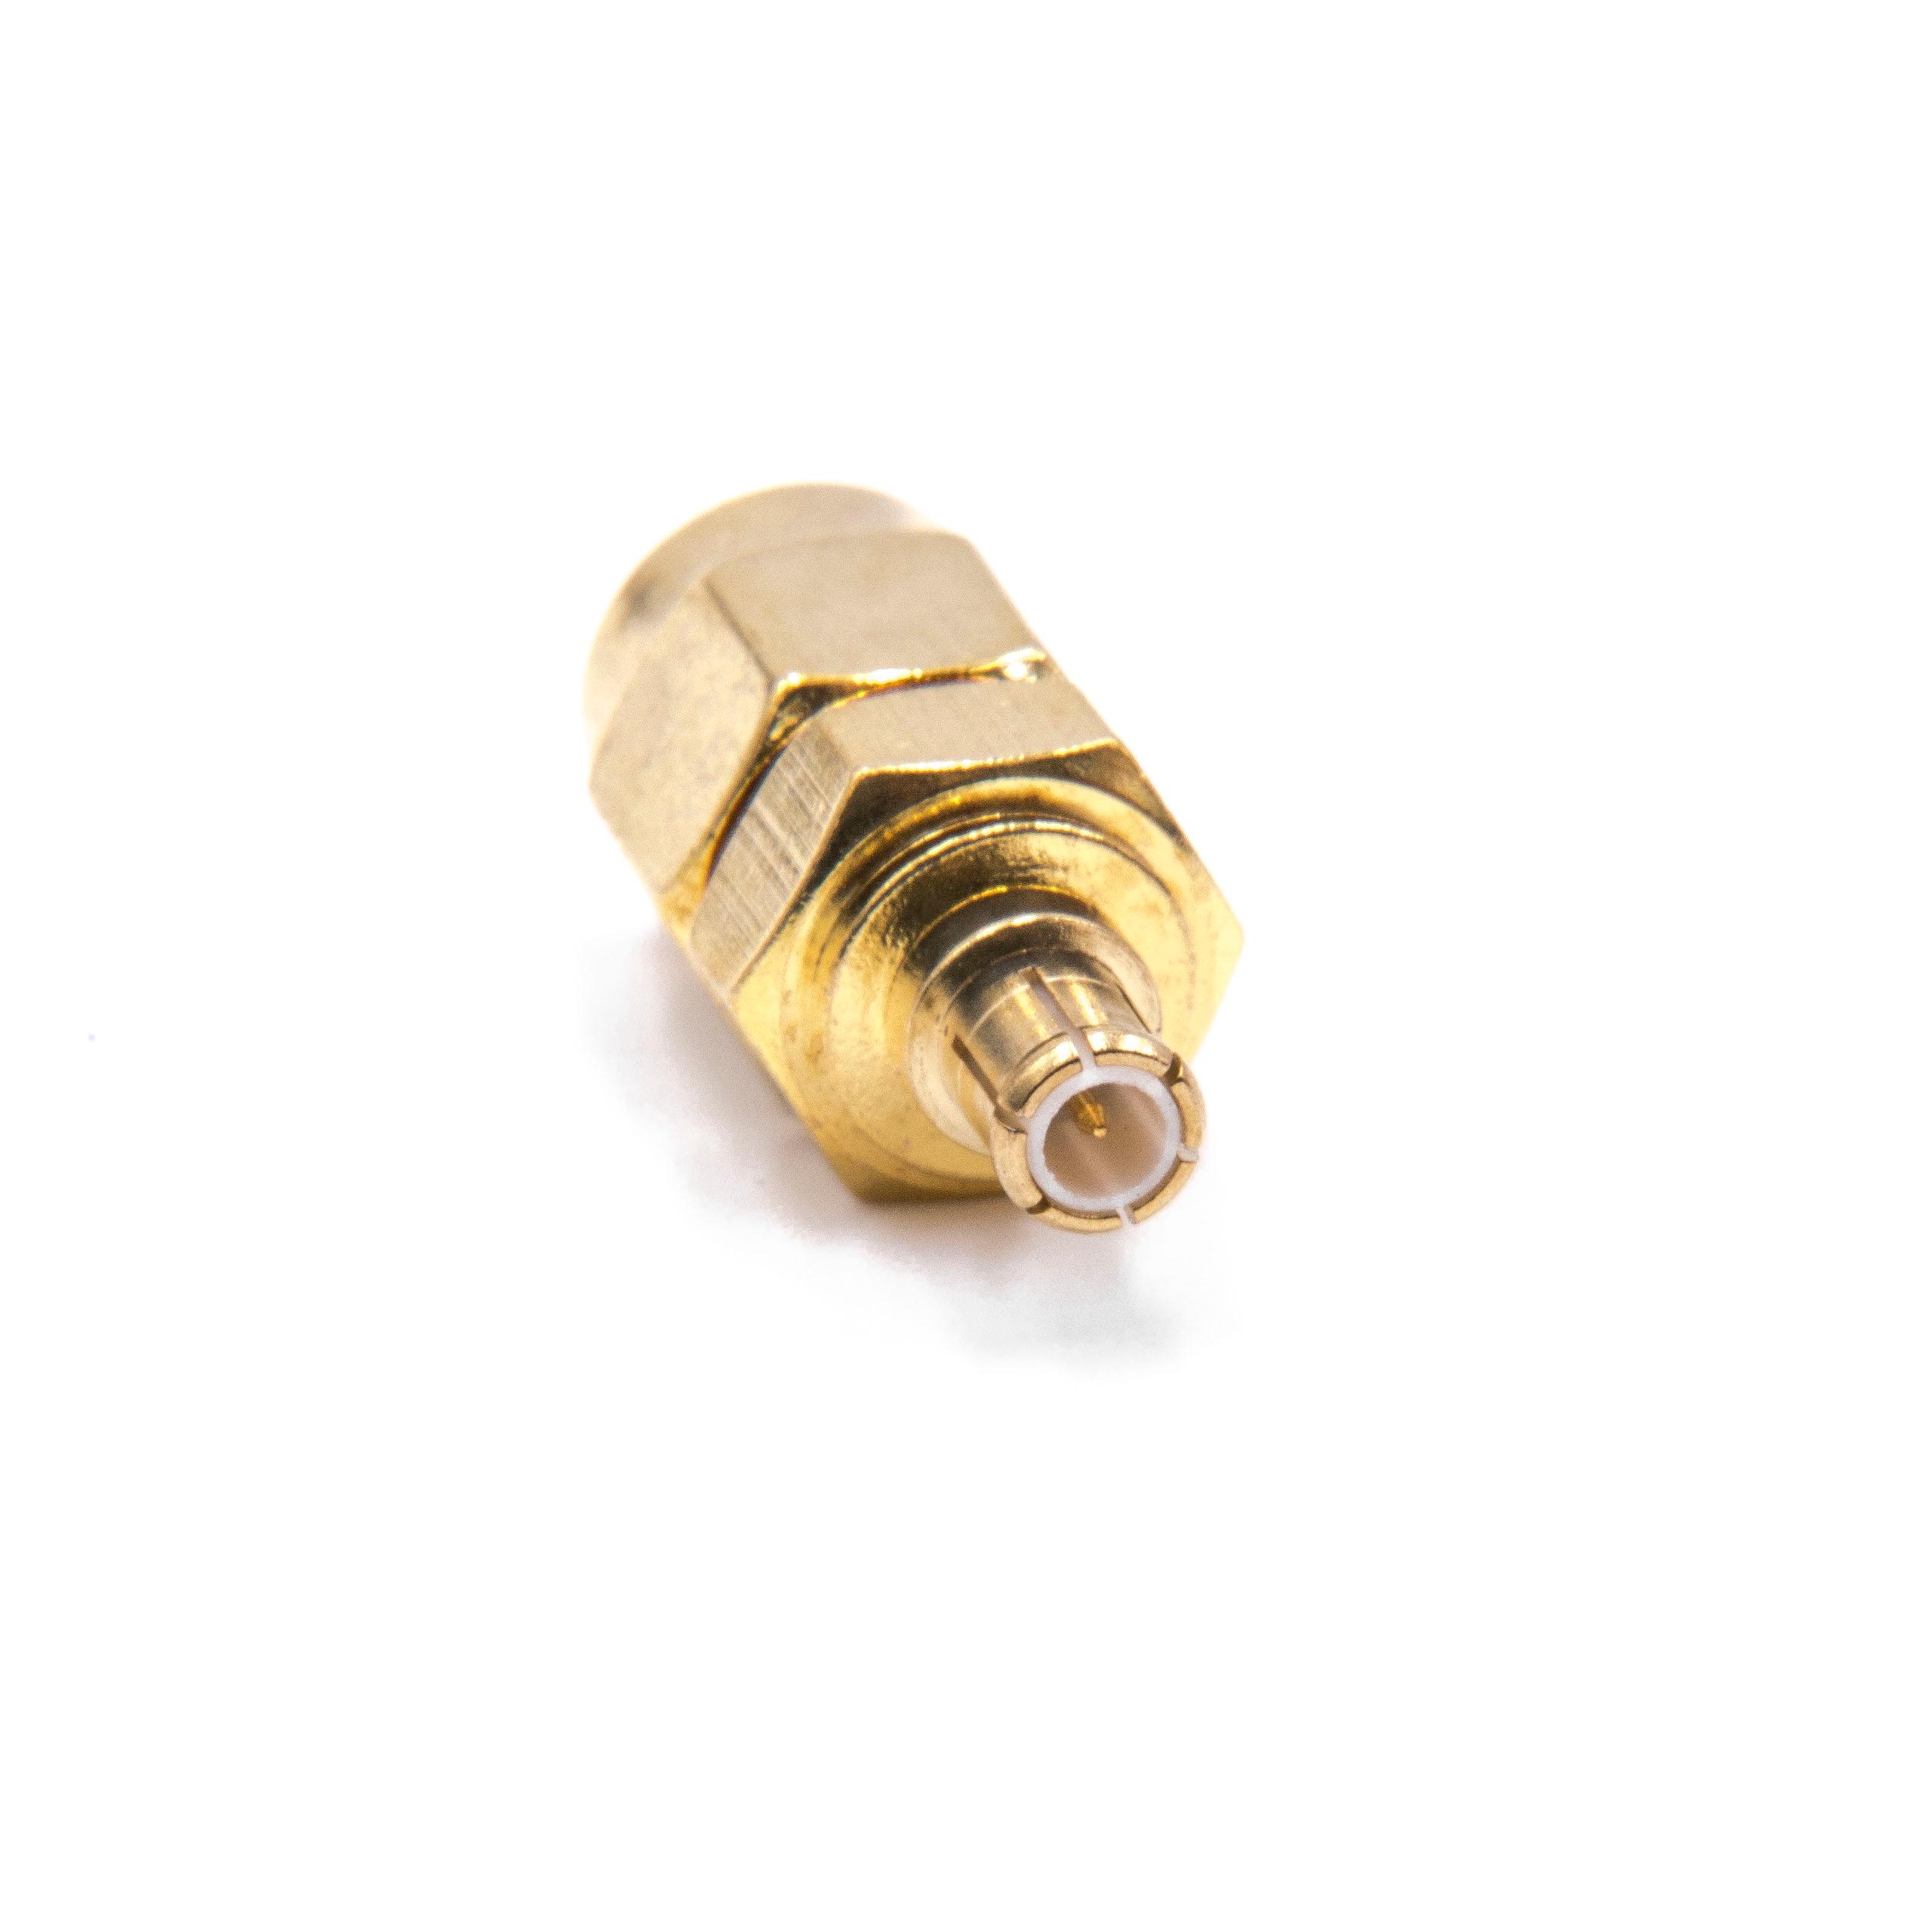 MCX Coaxial Adapter (m) to SMA plug for various High-Frequency Technology Devices - HF Adapter